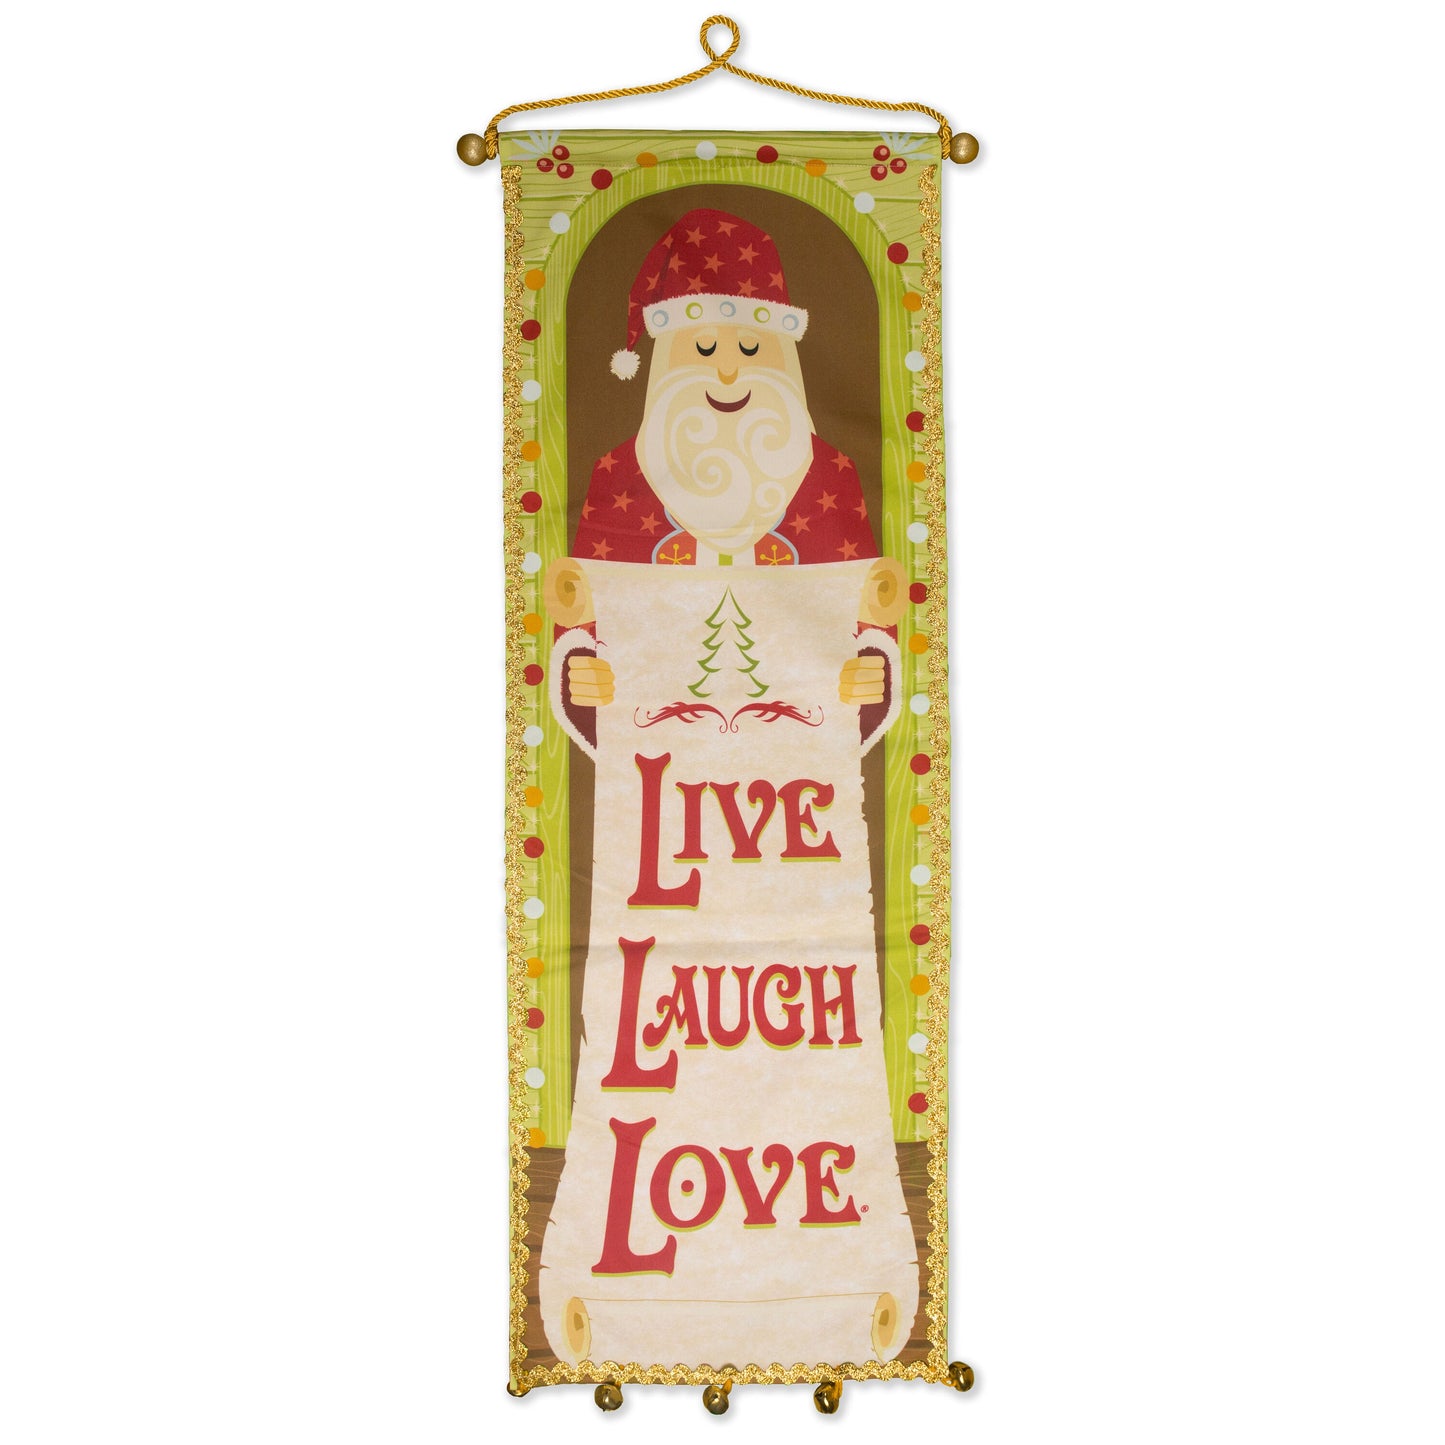 Live Laugh Love Santa’s Christmas Wish List for You Wall Door Tapestry